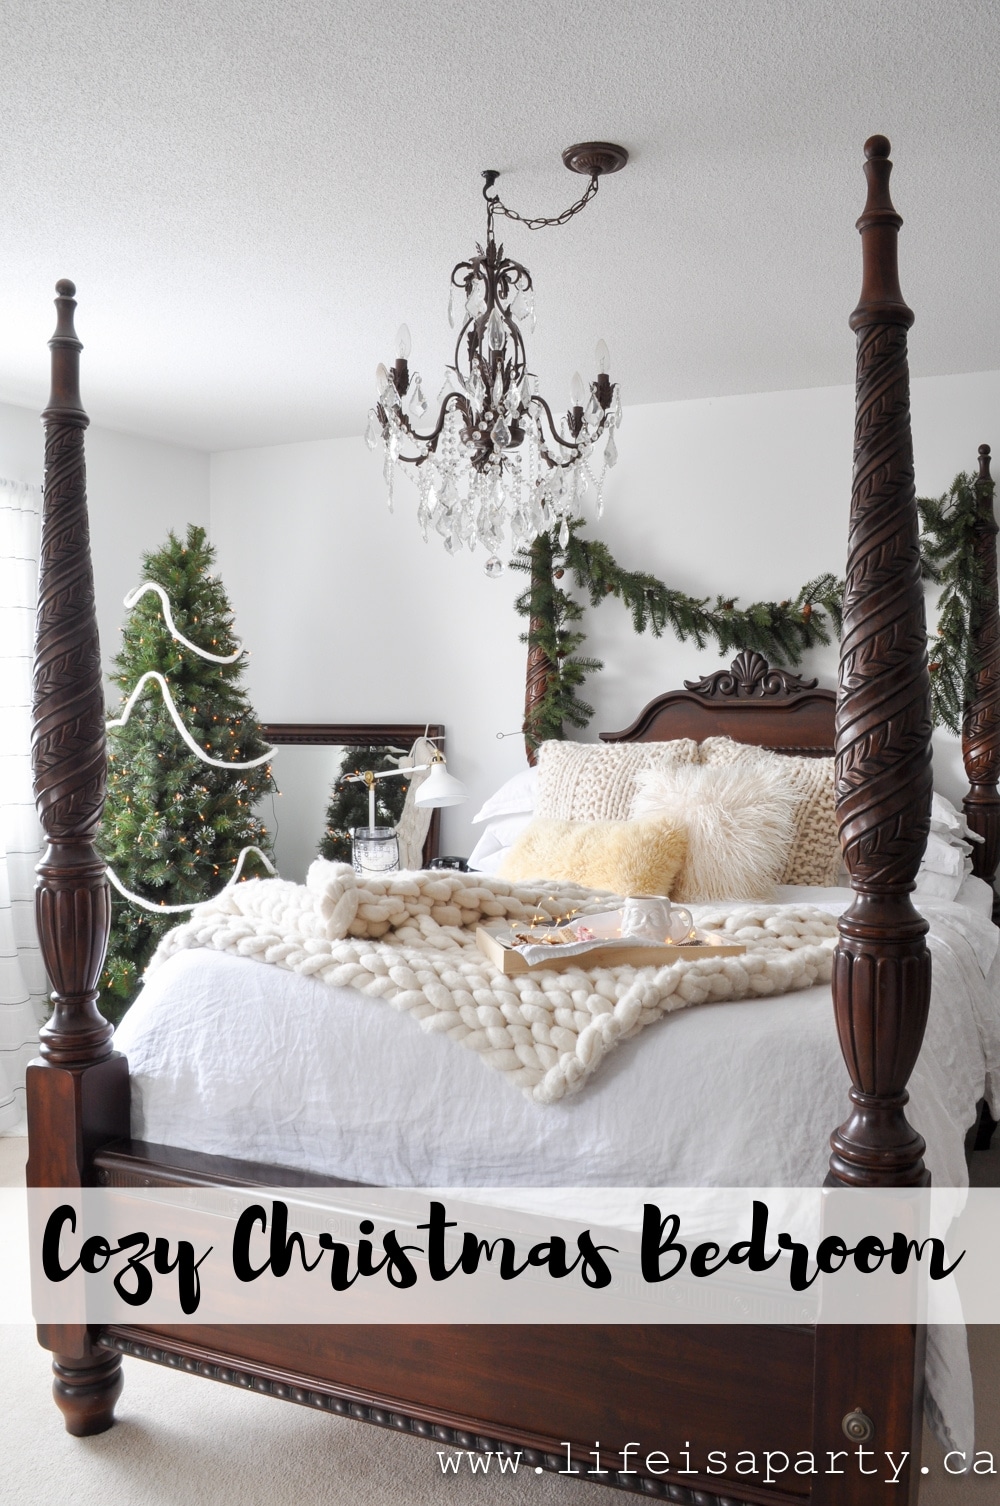 Cozy Christmas Bedroom: Linen and chunky knits, a Christmas tree, candles, and a Christmas gallery wall help create a cozy space for Christmas.